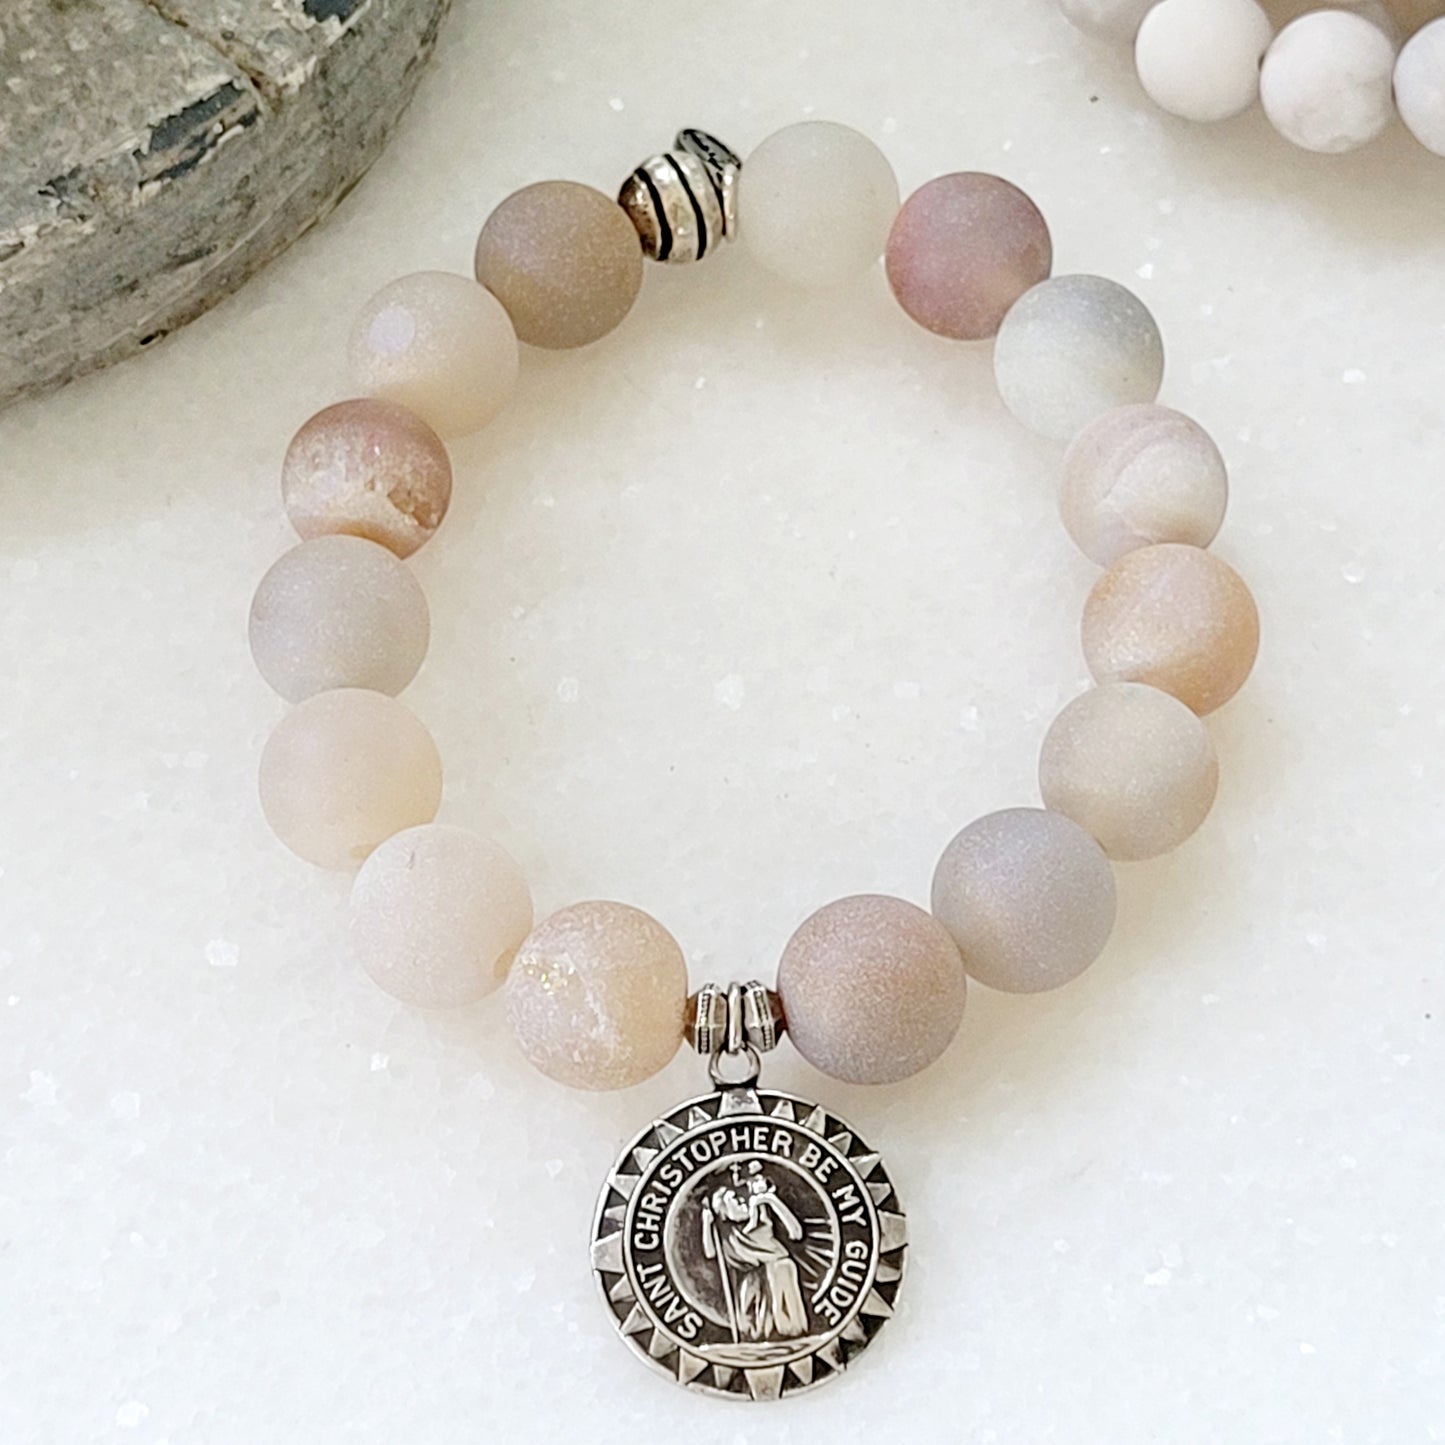 Druzy Agate 12mm Beaded Bracelet with Sterling Silver St. Christopher Medal - Afterlife Jewelry Designs